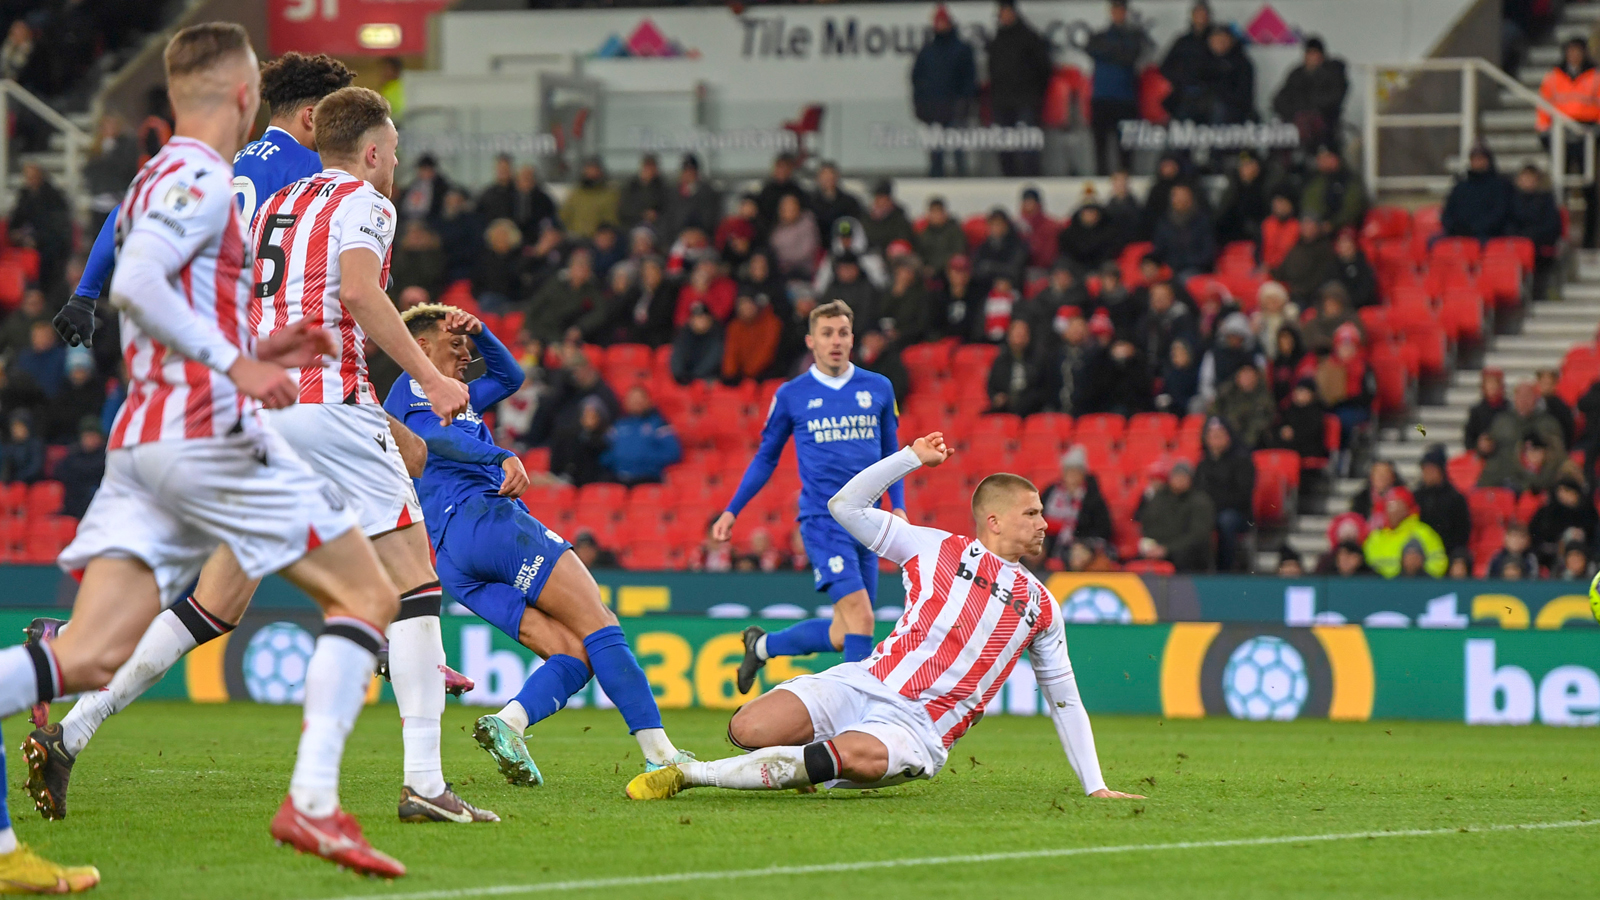 We don't fear Stoke City: Cardiff striker relishing trip to bet365